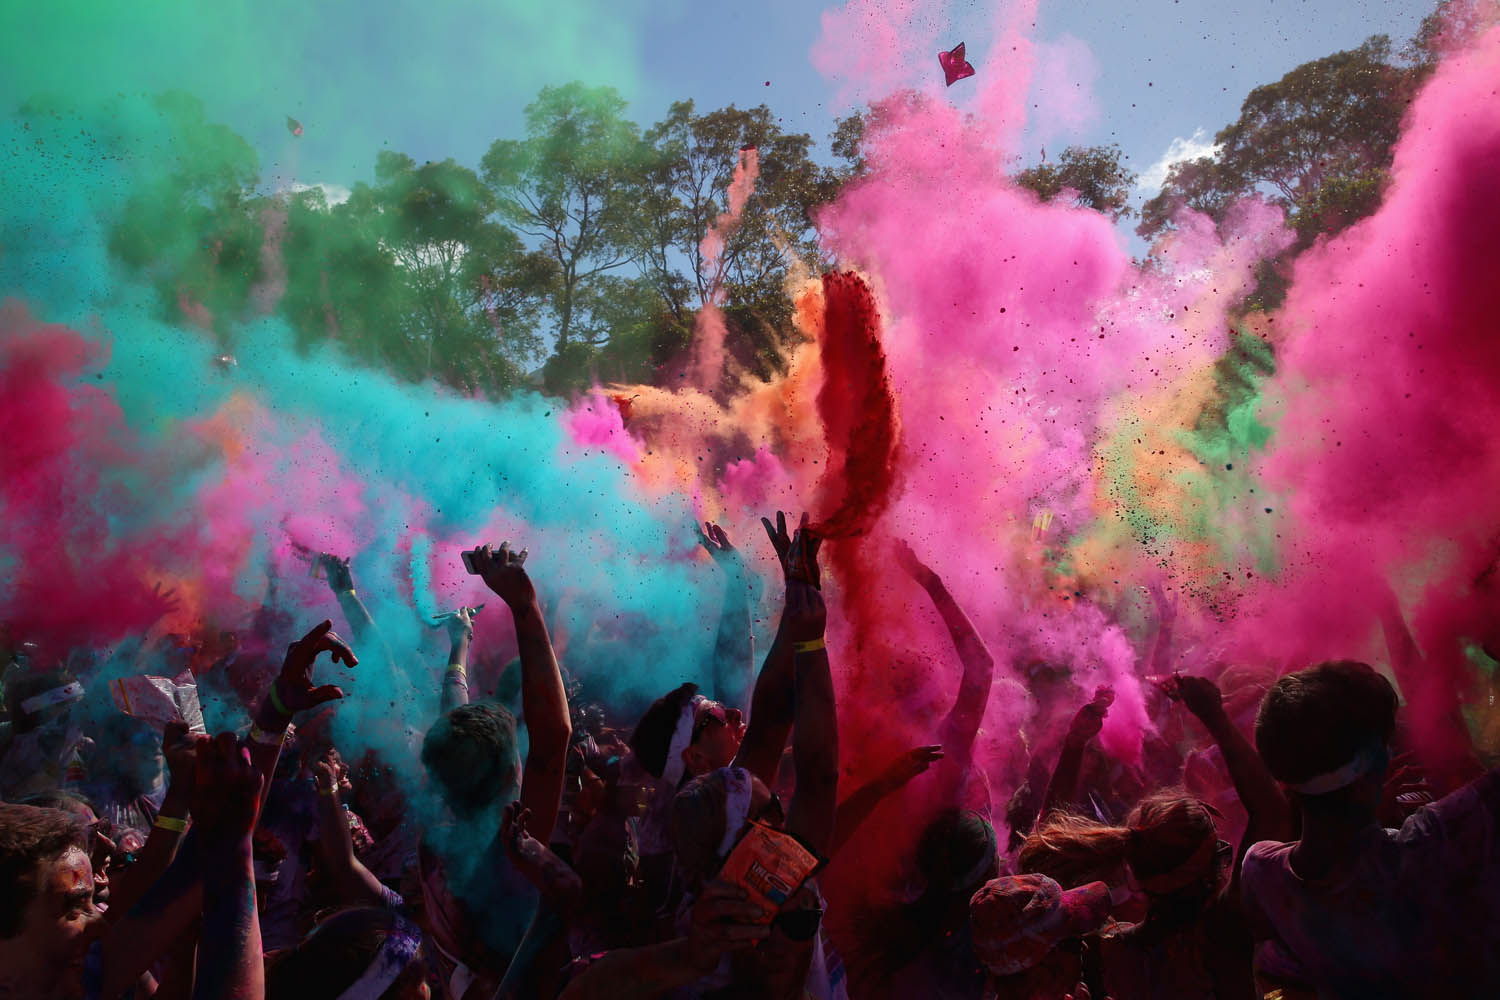 Feb. 9, 2014. Competitors listen to a DJ set and throw packets of colored powder after finishing the Color Run at Sydney Olympic Park in Sydney, Australia.